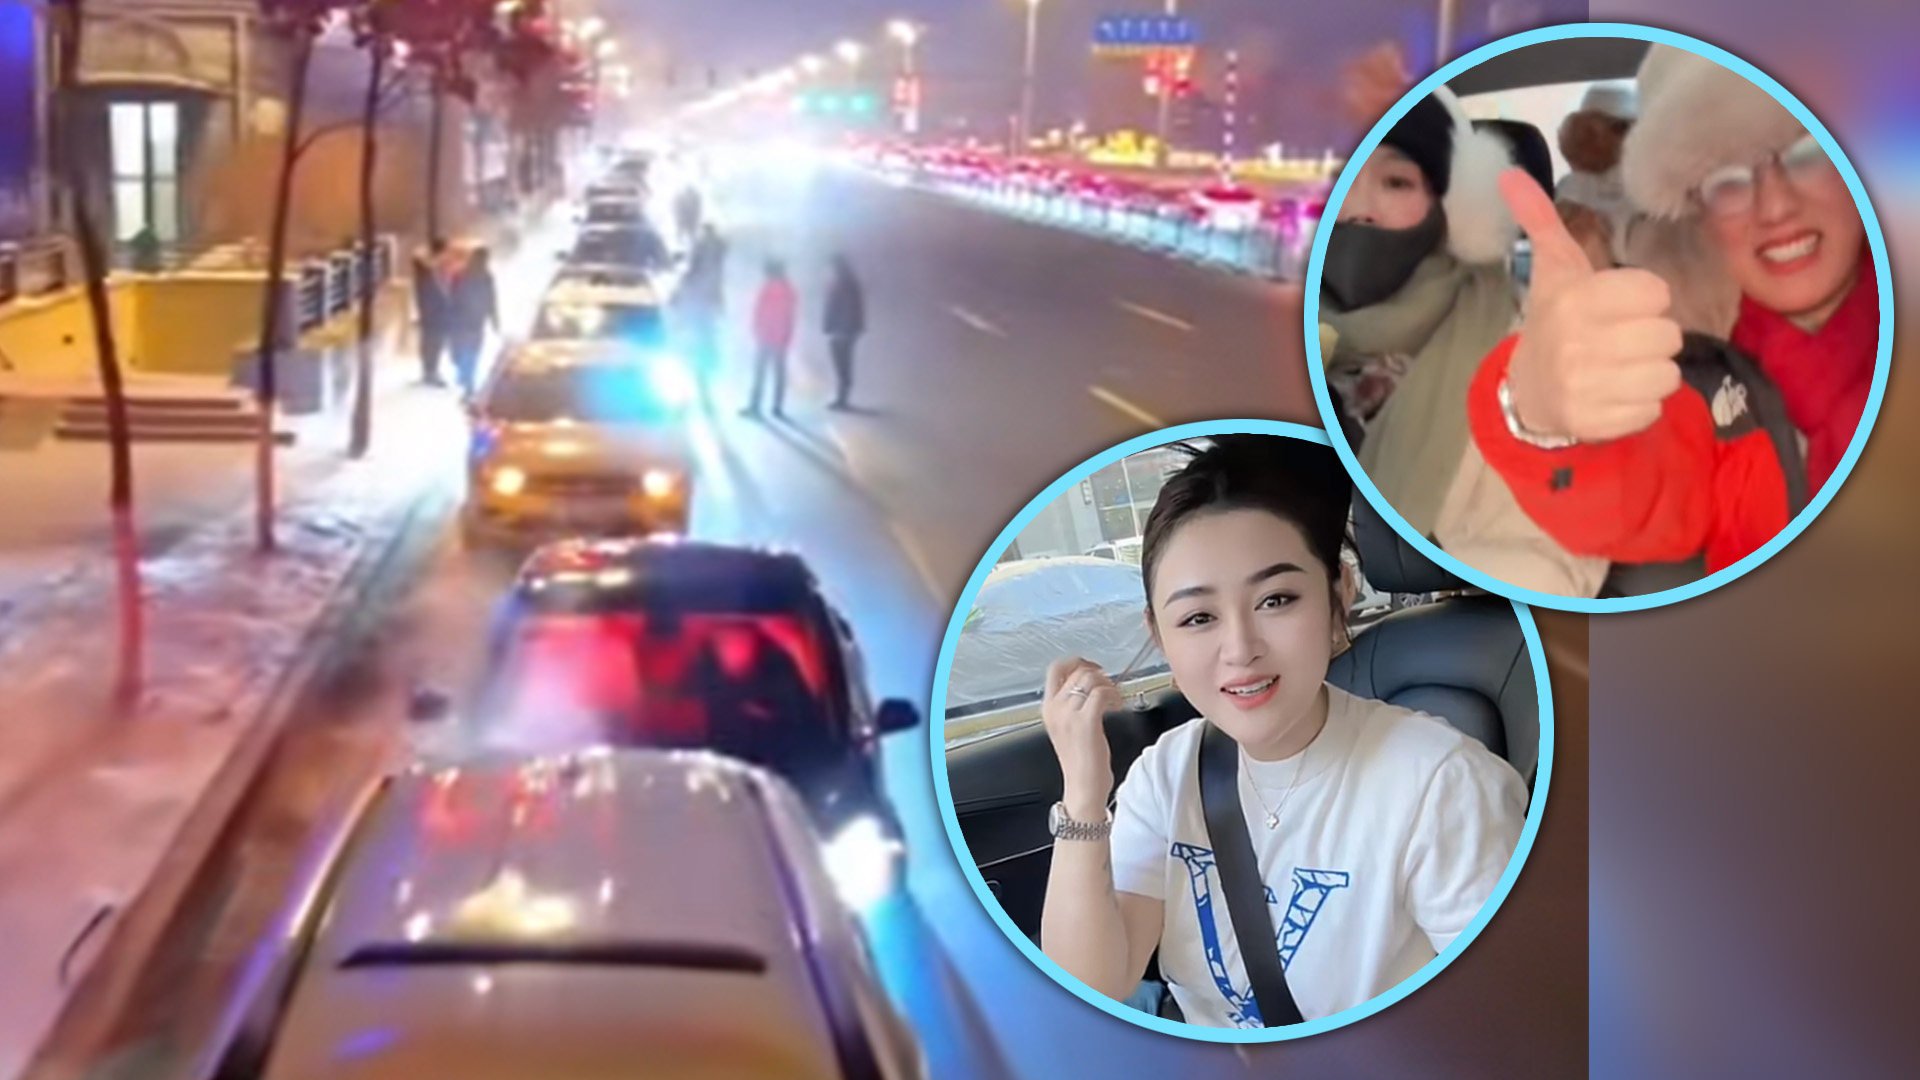 Friendly local drivers in China’s freezing cold northernmost province are offering free rides for domestic tourists who cannot get a ride-hailing car, garnering widespread praise on mainland social media. Photo: SCMP composite/Douyin